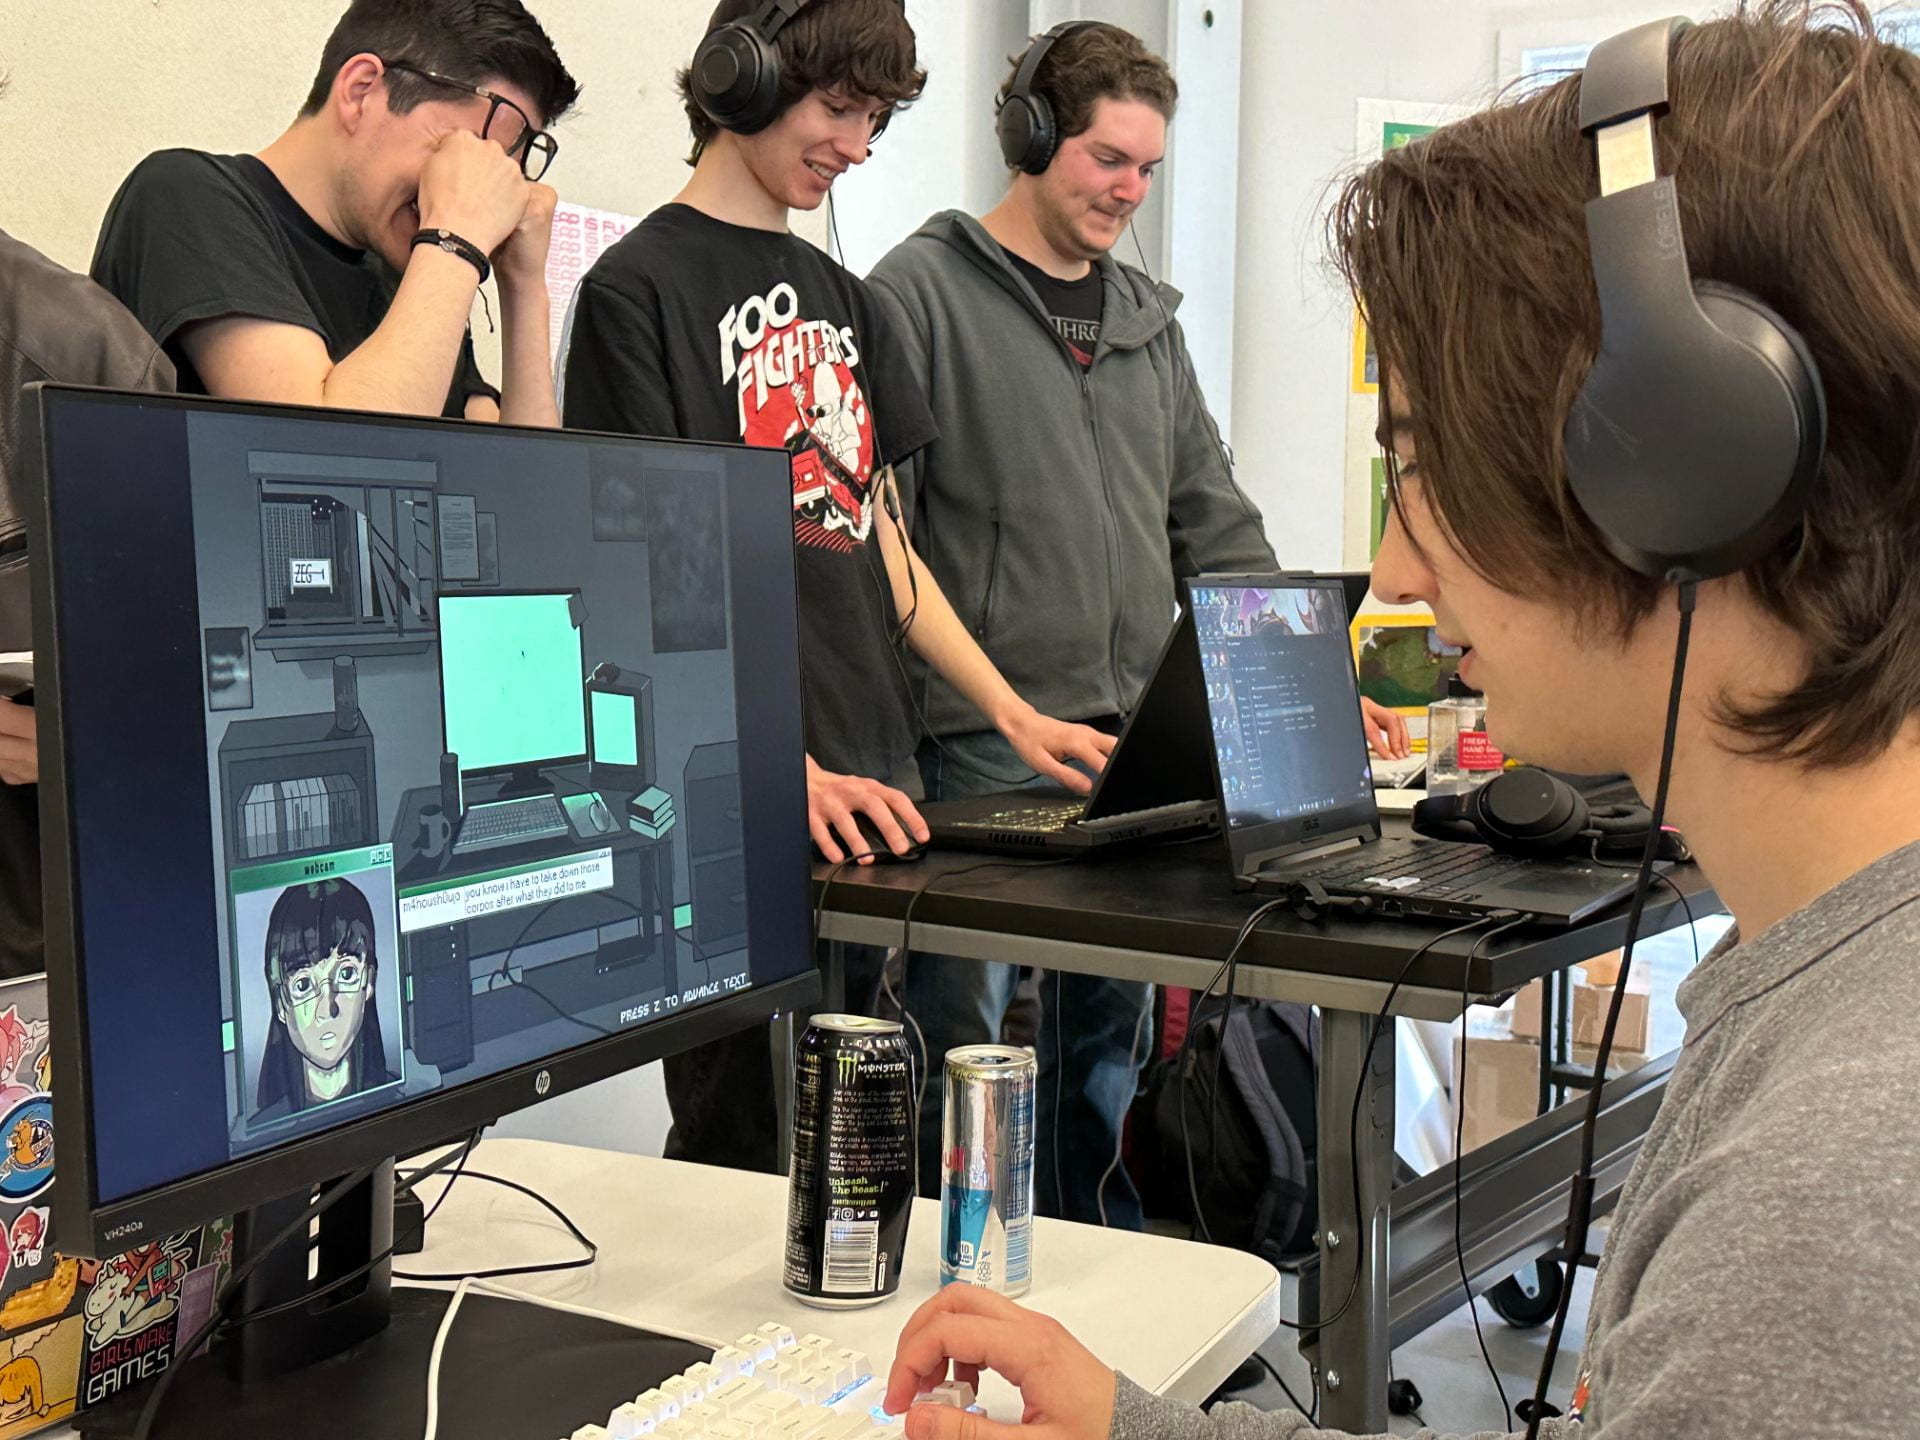 4 students playing a game at the UCSC games showcase. The student closest to the front has on headphones